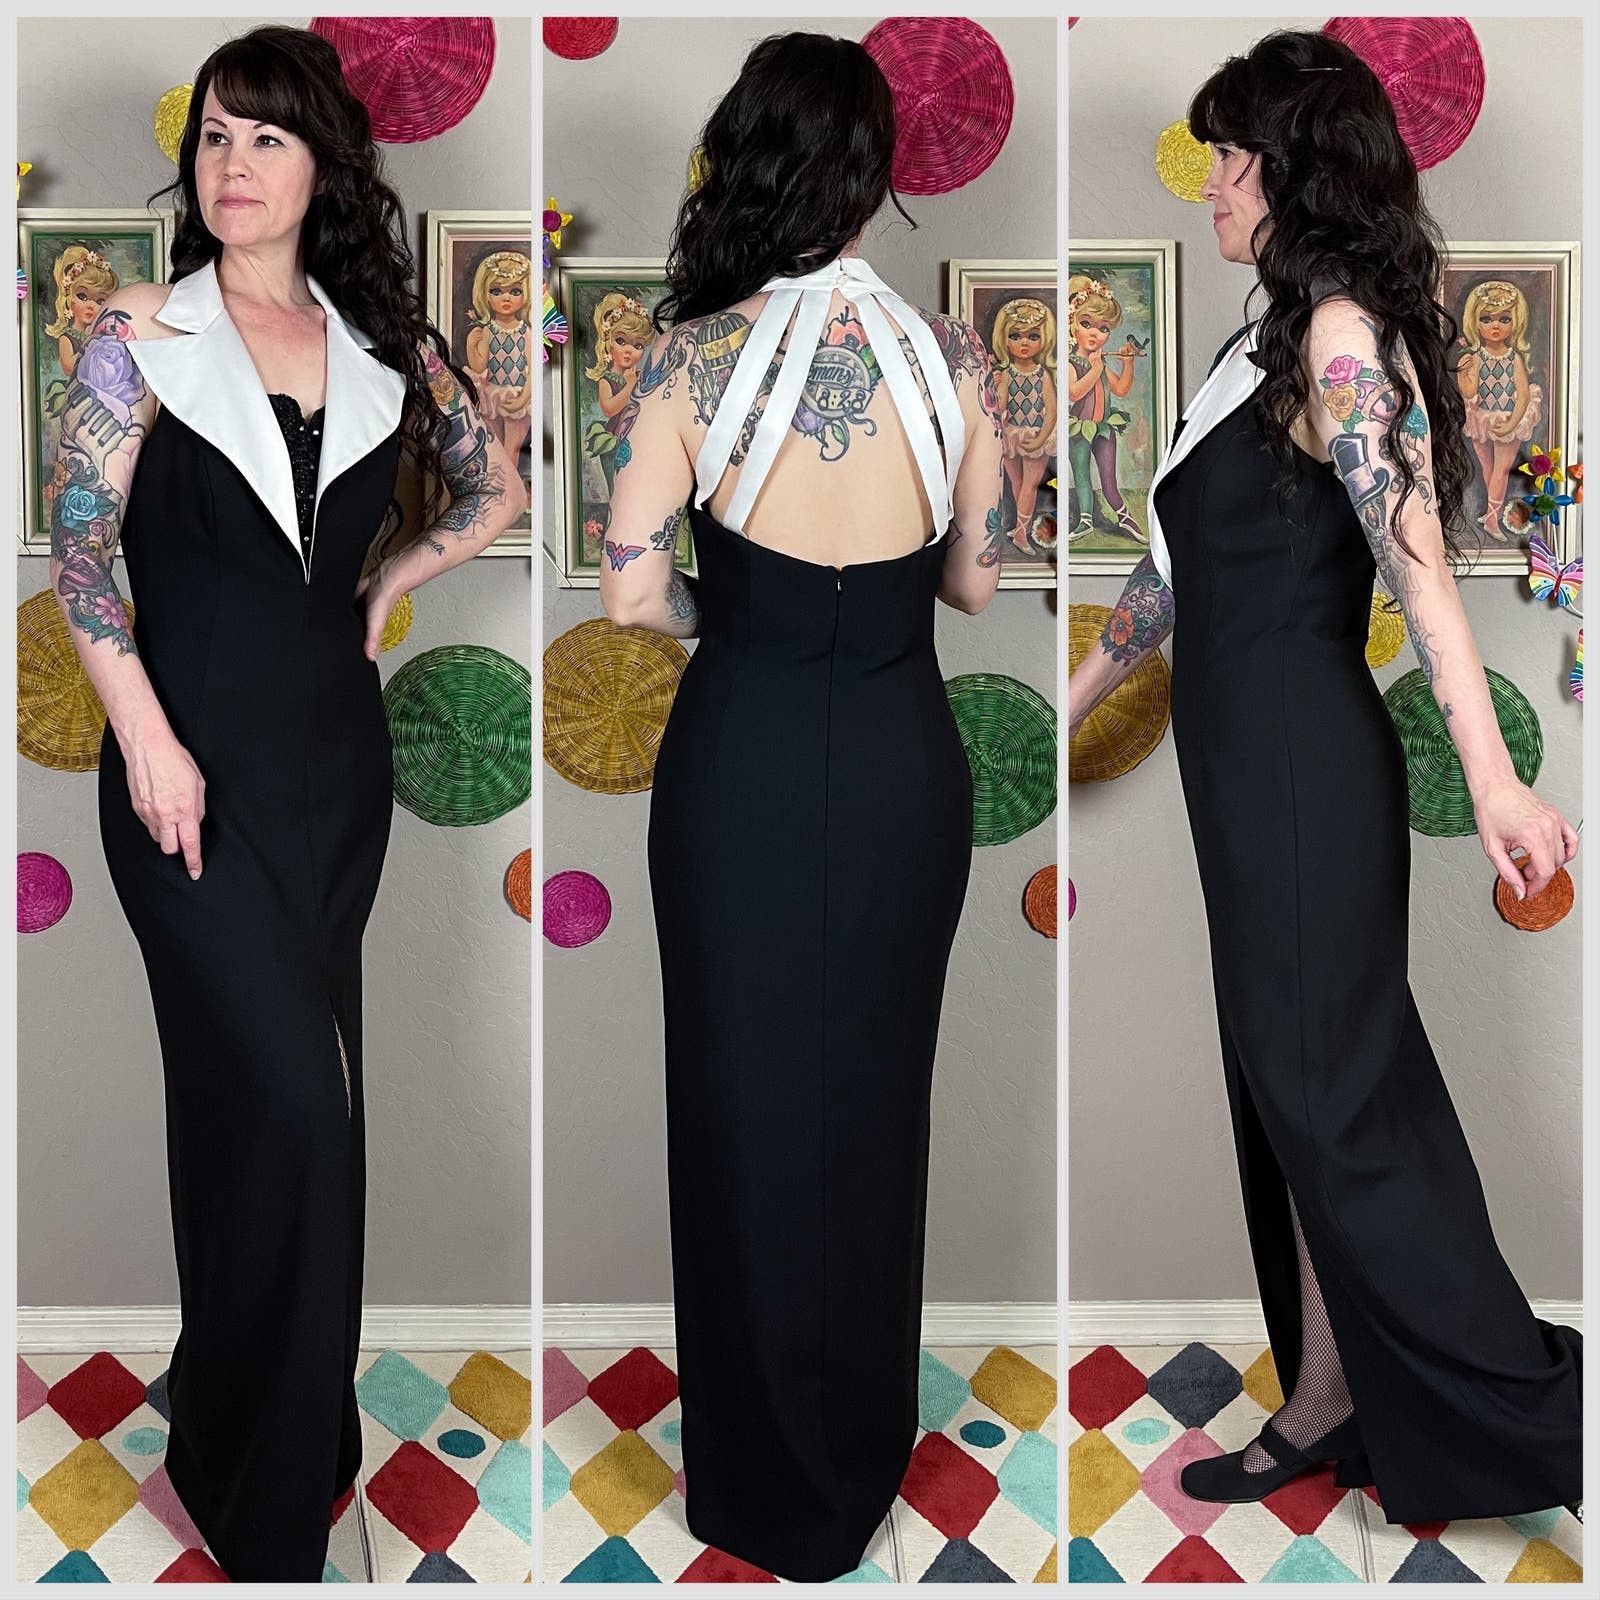 Vintage Vintage 1990s Black and White Sleeveless Tuxedo Gown Size M / US 6-8 / IT 42-44 - 2 Preview